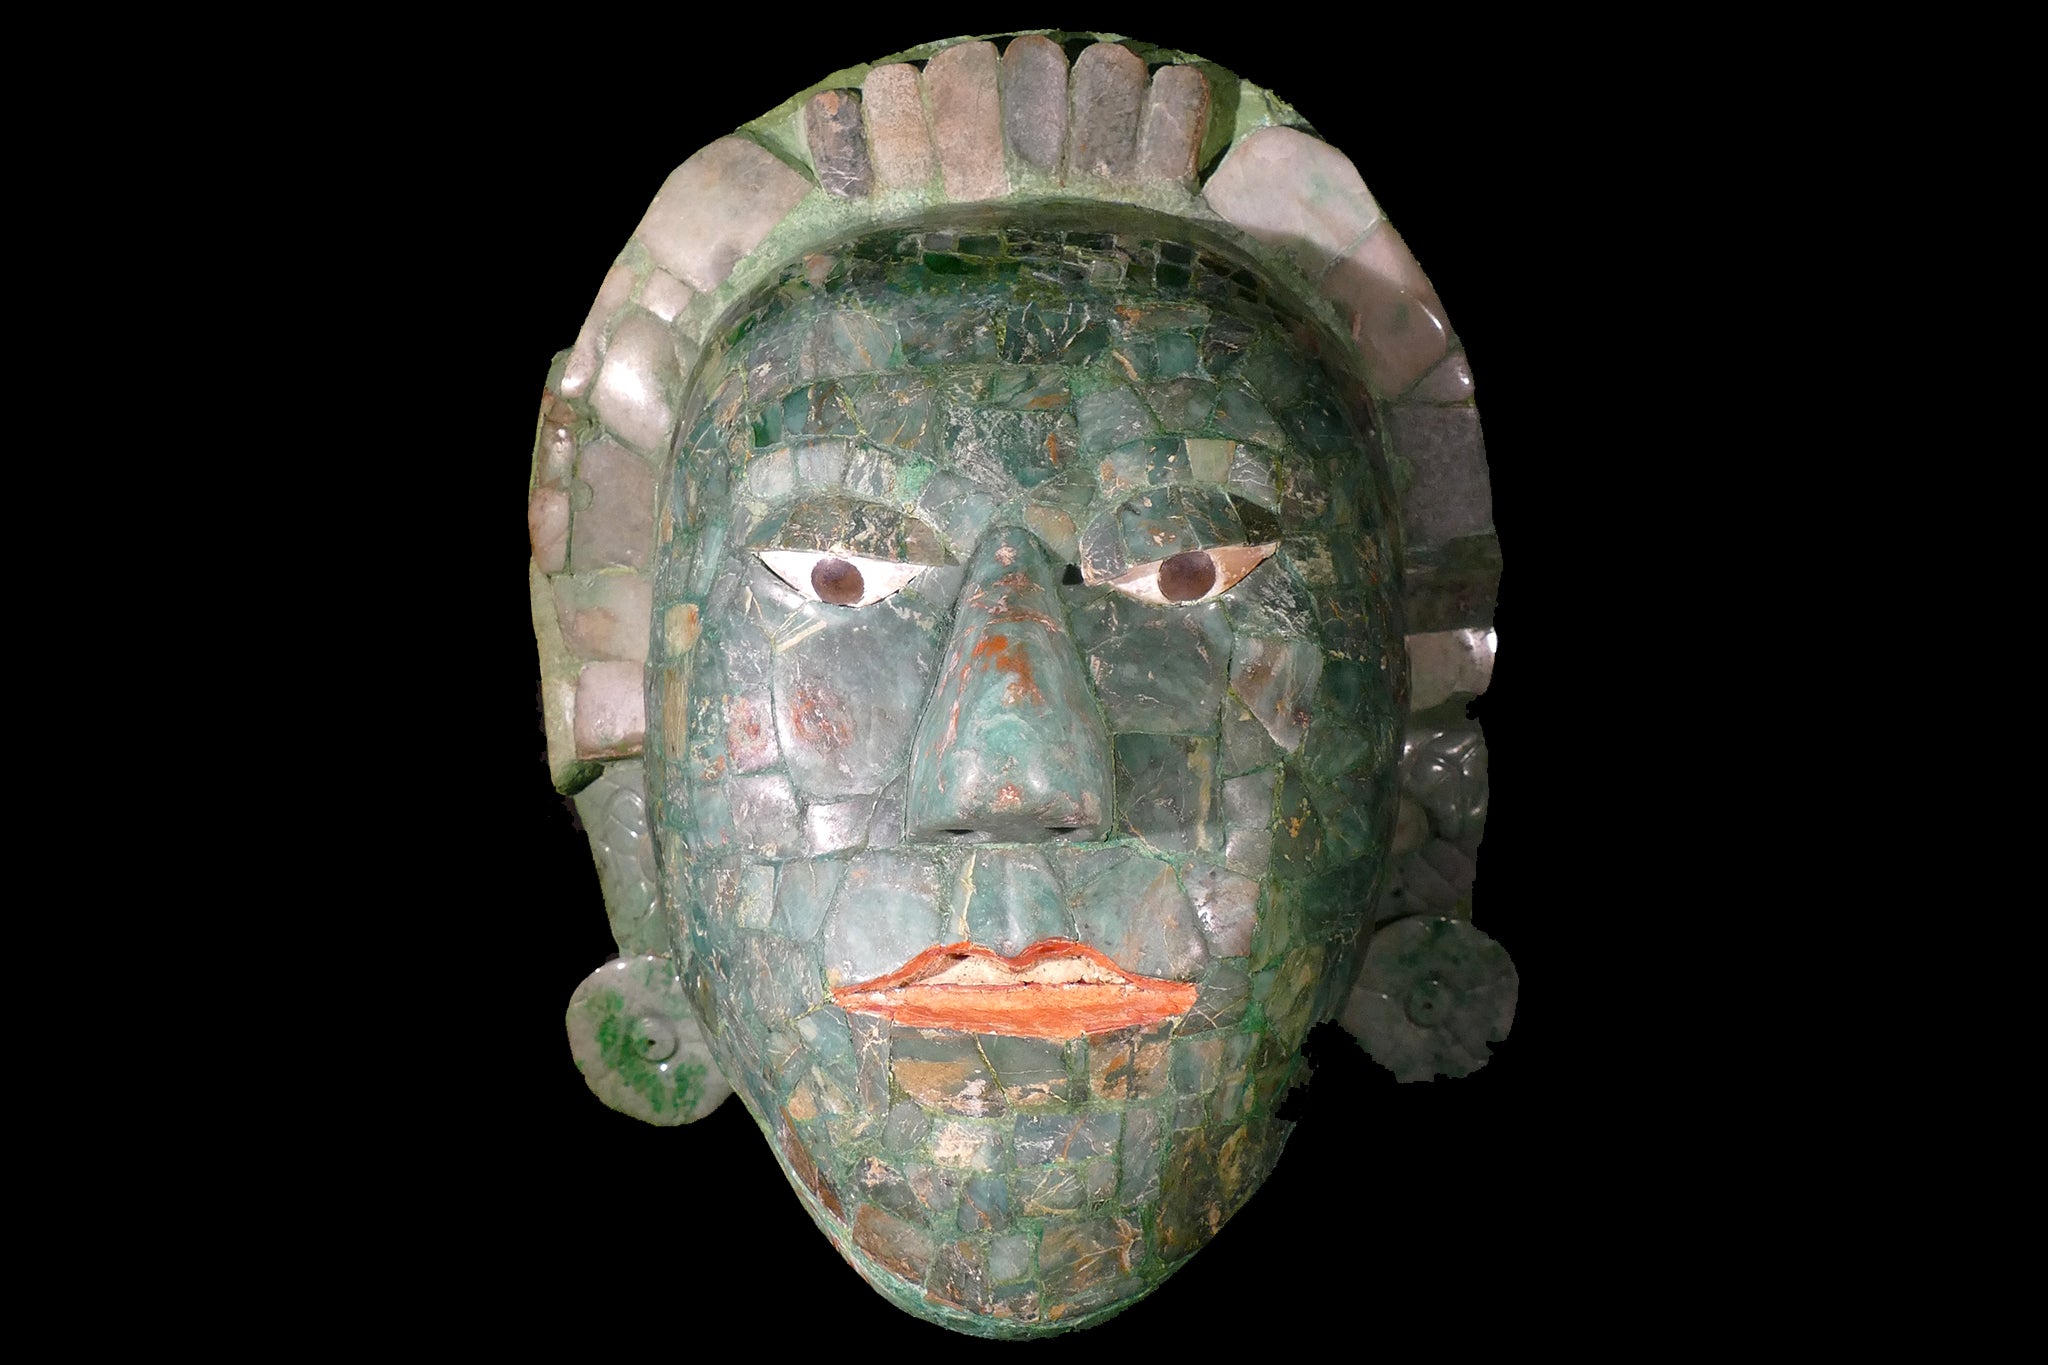 Maya royalty: probable conquerors burned the kingdom’s sacred regalia, including a jade death mask much like this one